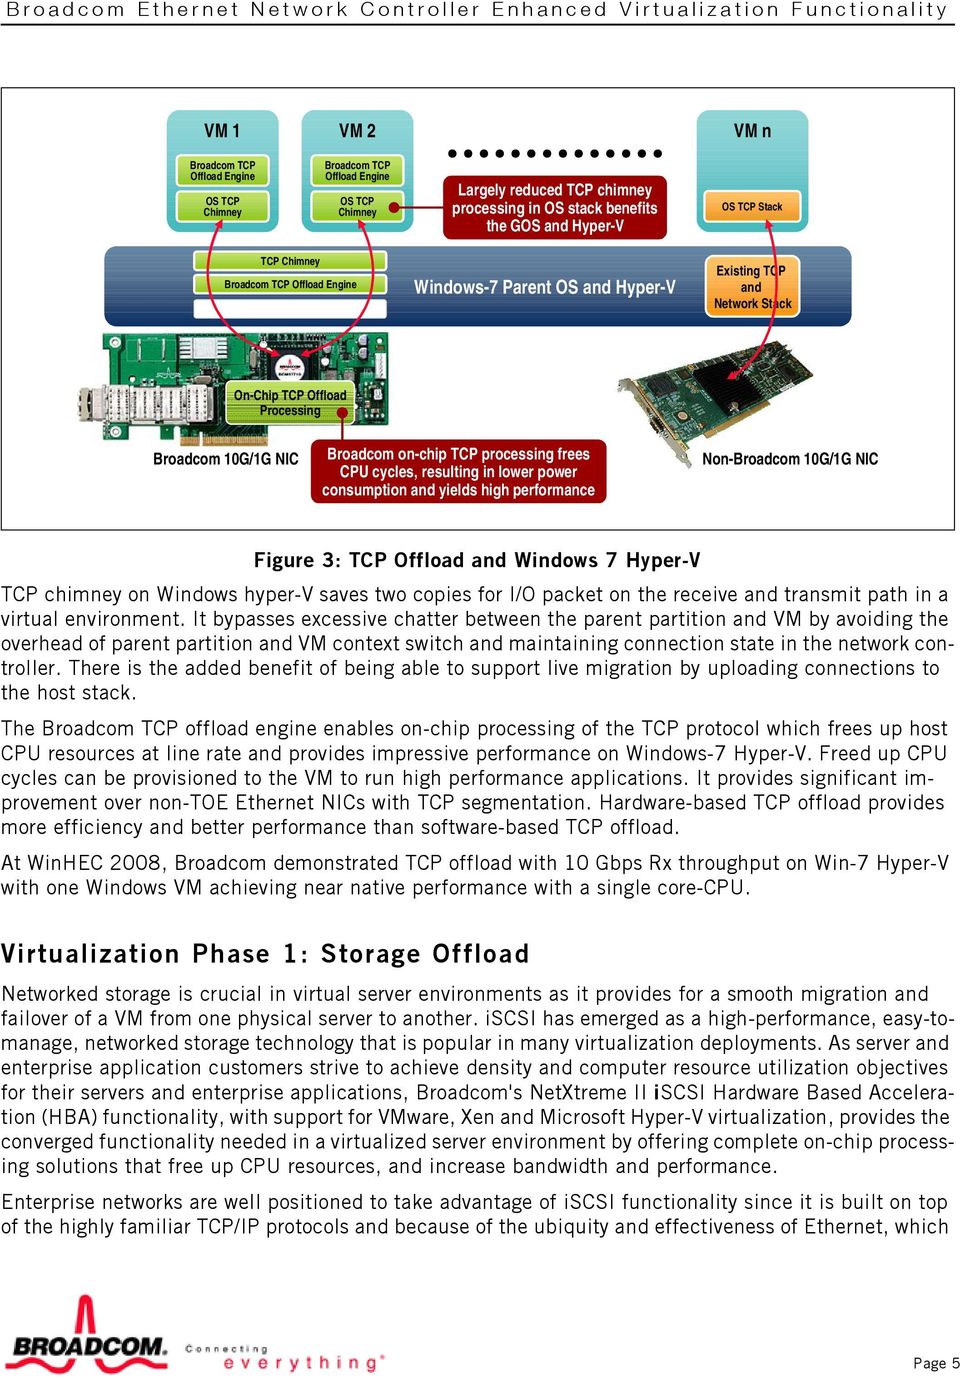 yields high performance Non-Broadcom 10G/1G NIC Figure 3: TCP Offload and Windows 7 Hyper-V TCP chimney on Windows hyper-v saves two copies for I/O packet on the receive and transmit path in a